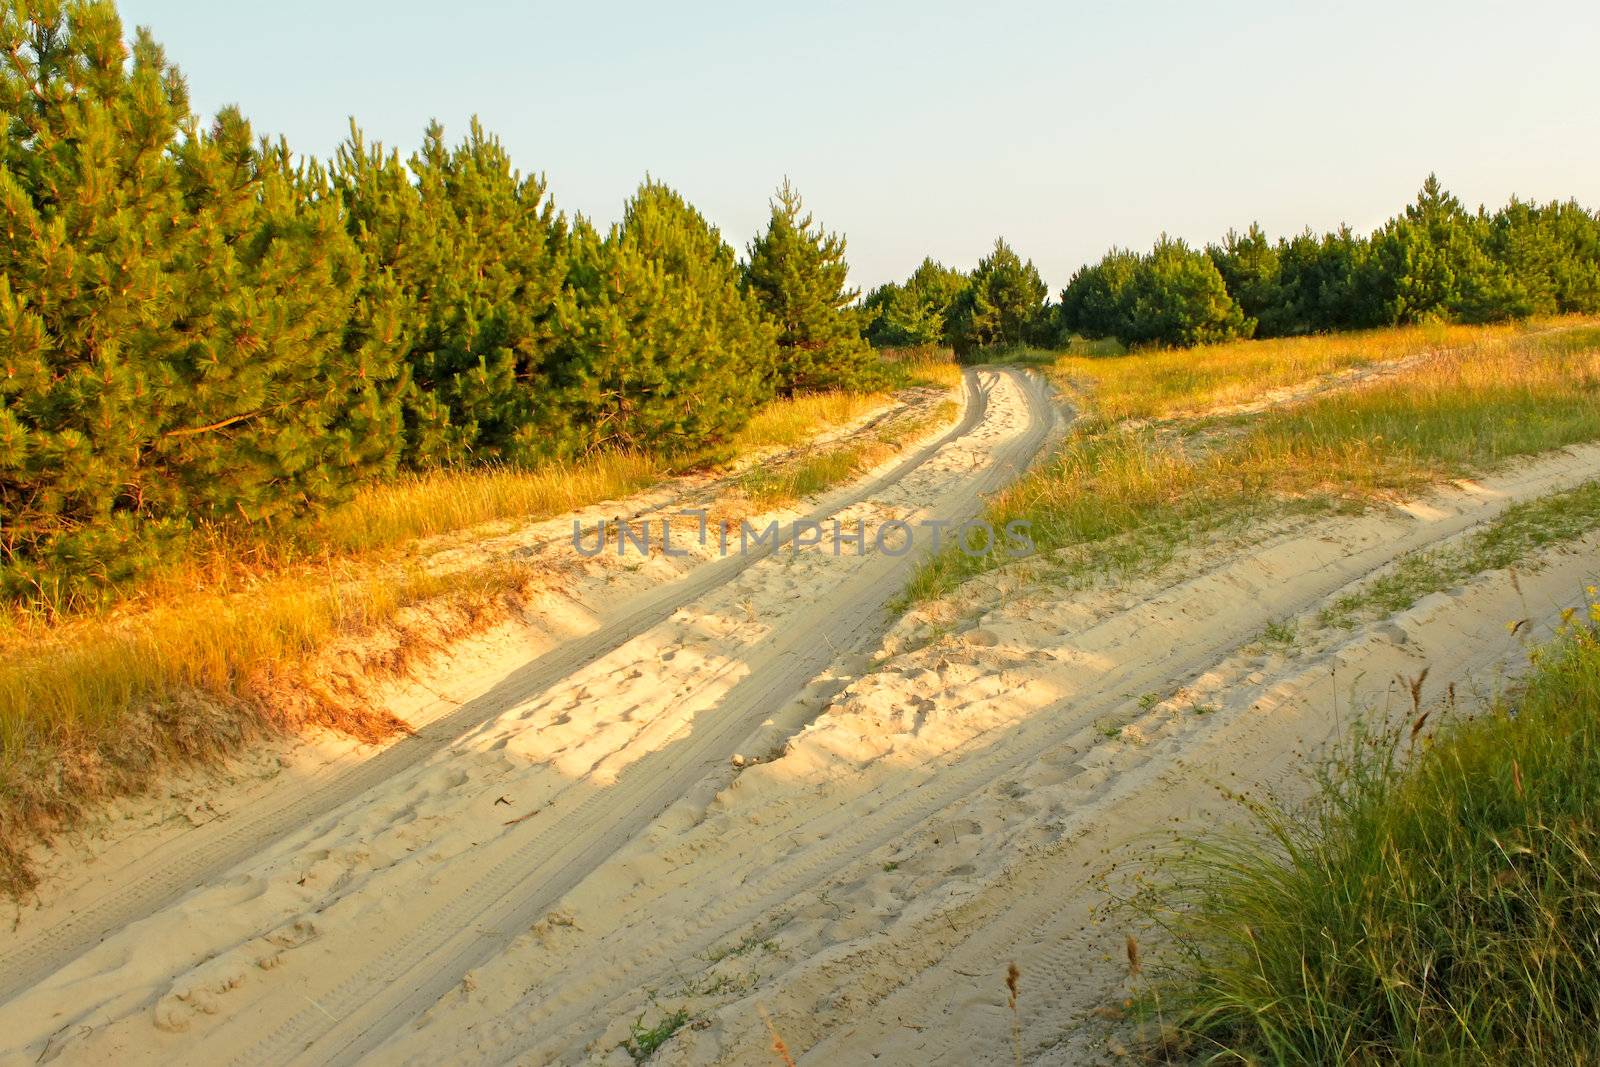 Fork road on sandy soil among pine forest by qiiip